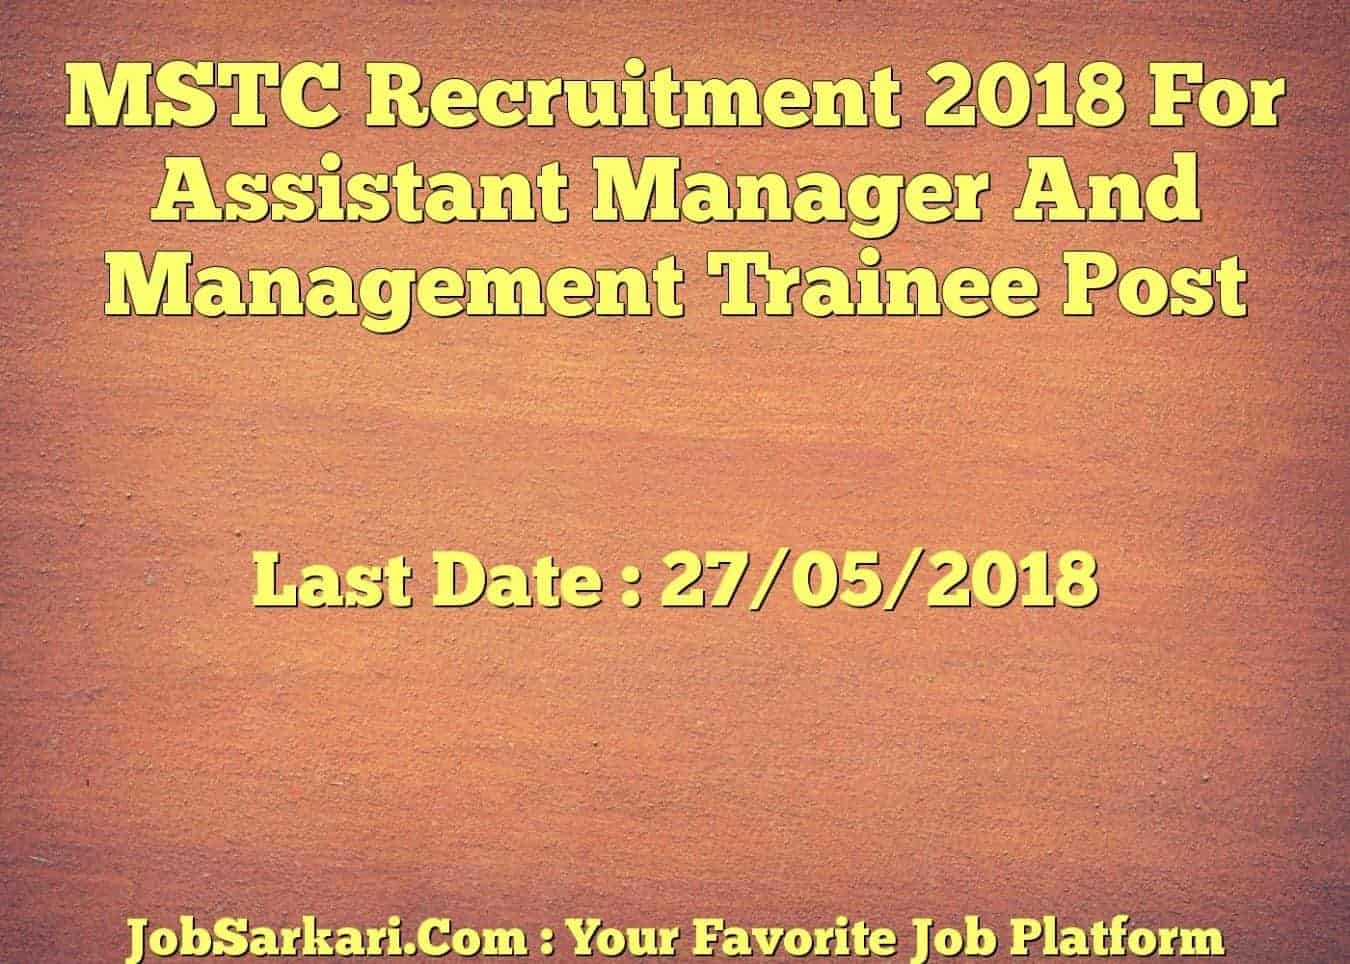 MSTC Recruitment 2018 For Assistant Manager And Management Trainee Post